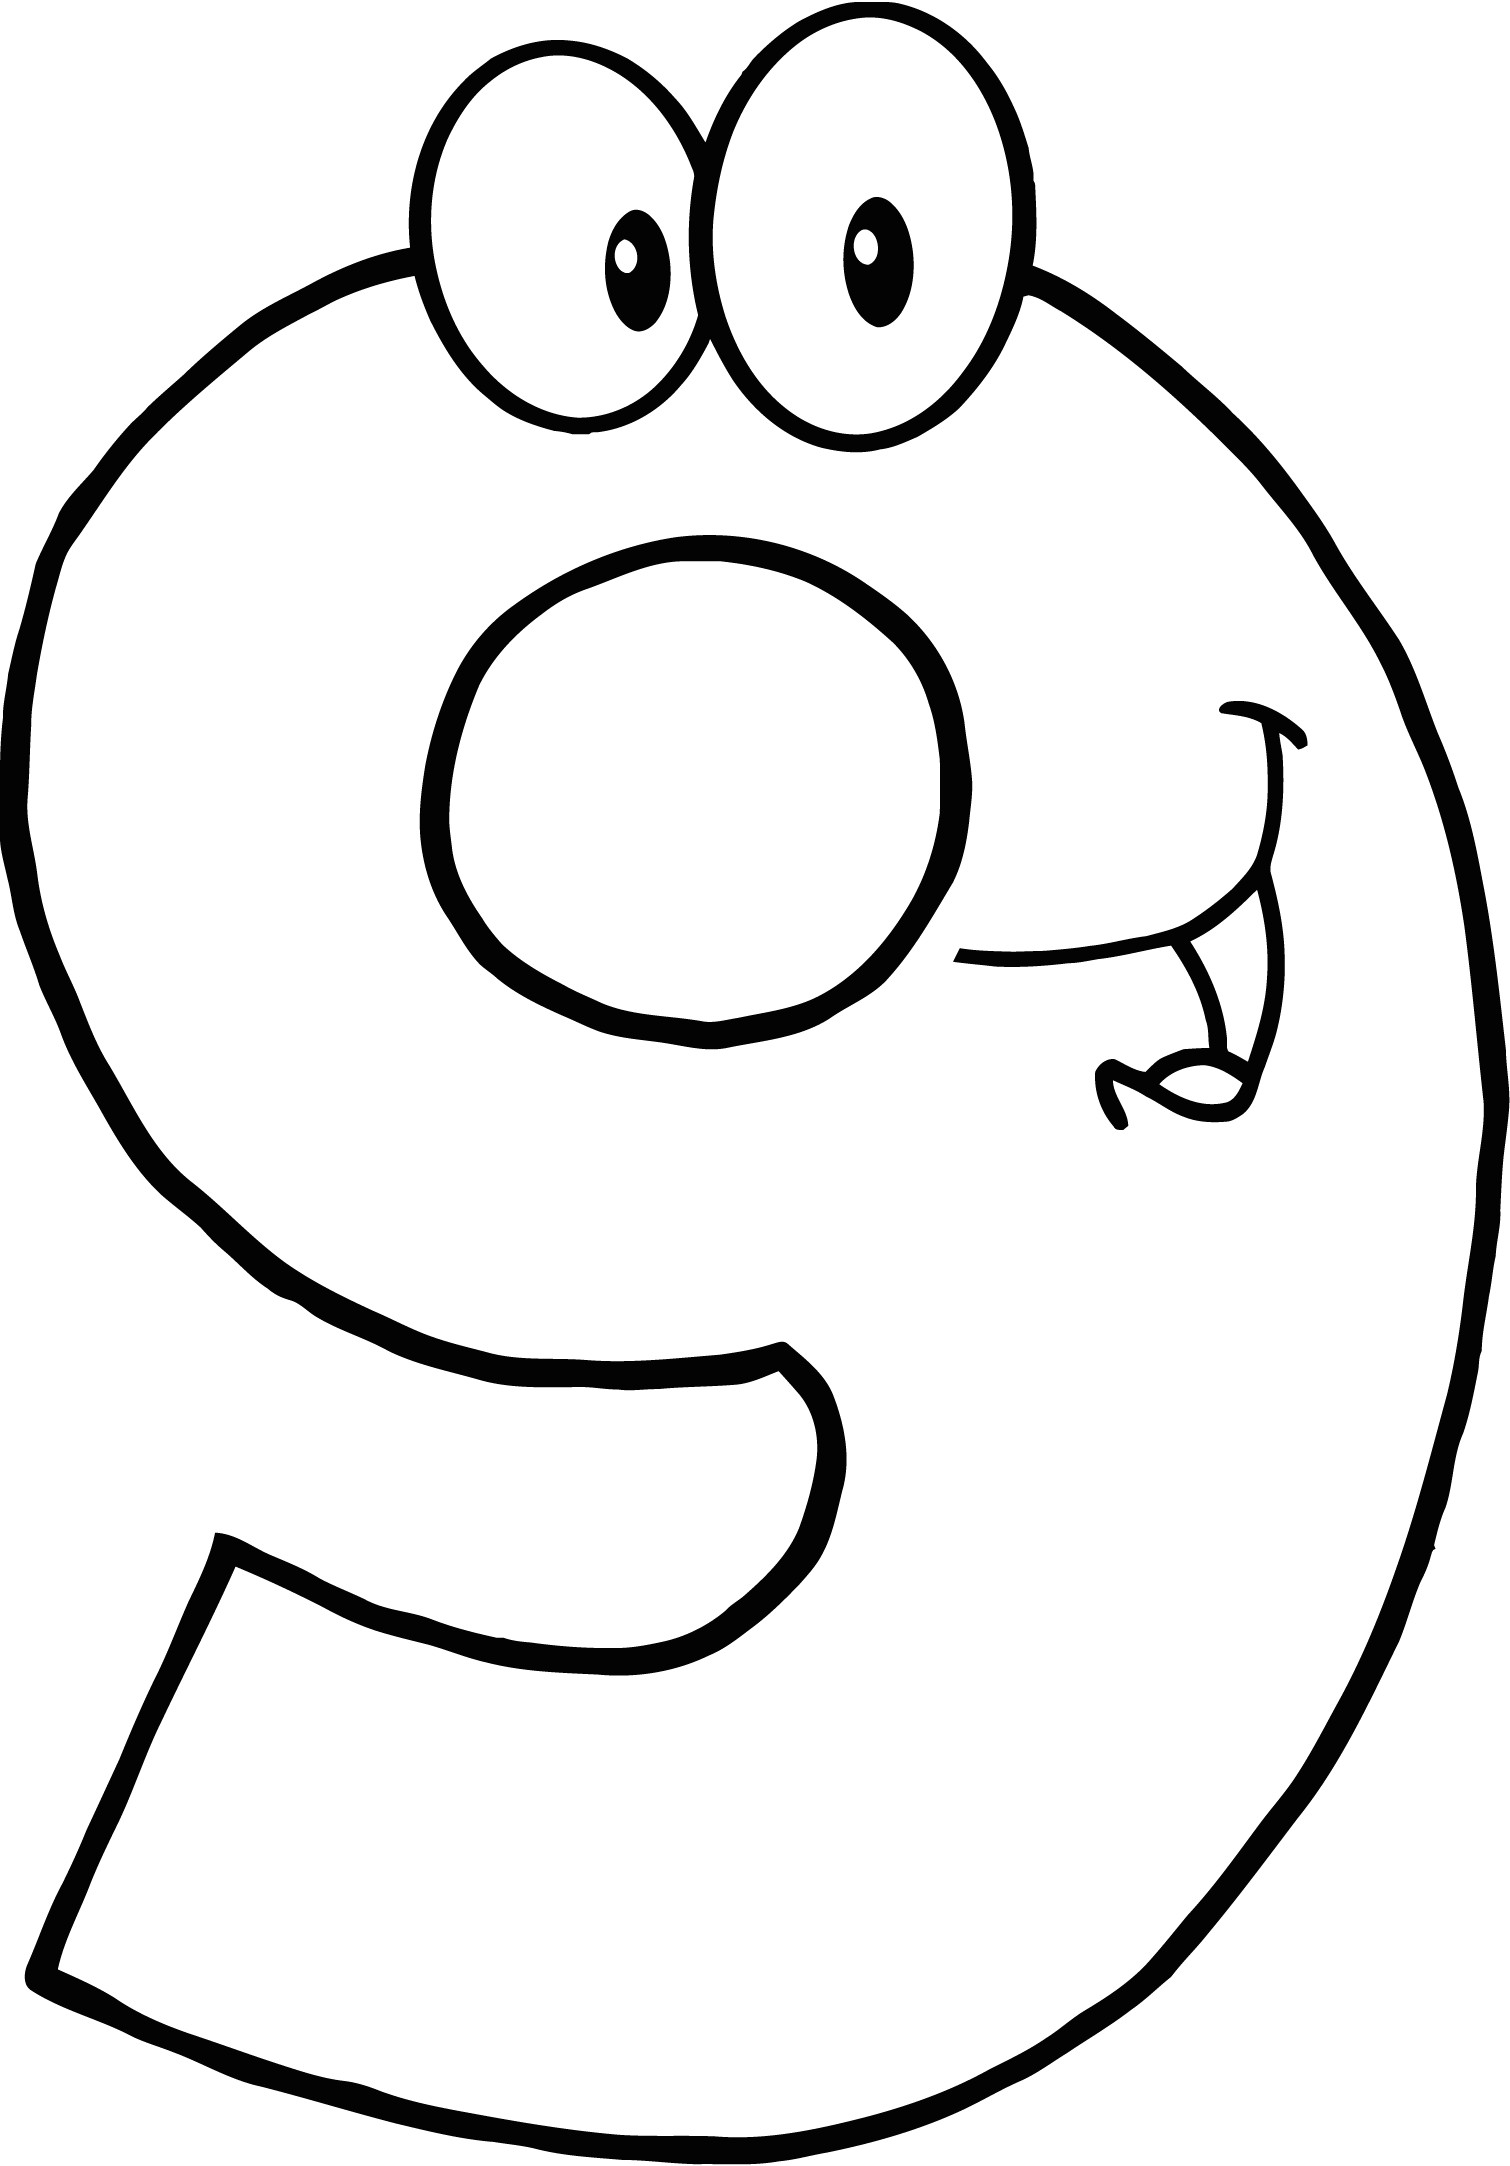 Number 9 Cartoon Drawing Free Number 9 Cliparts Black Download Free Clip Art Free Clip Art